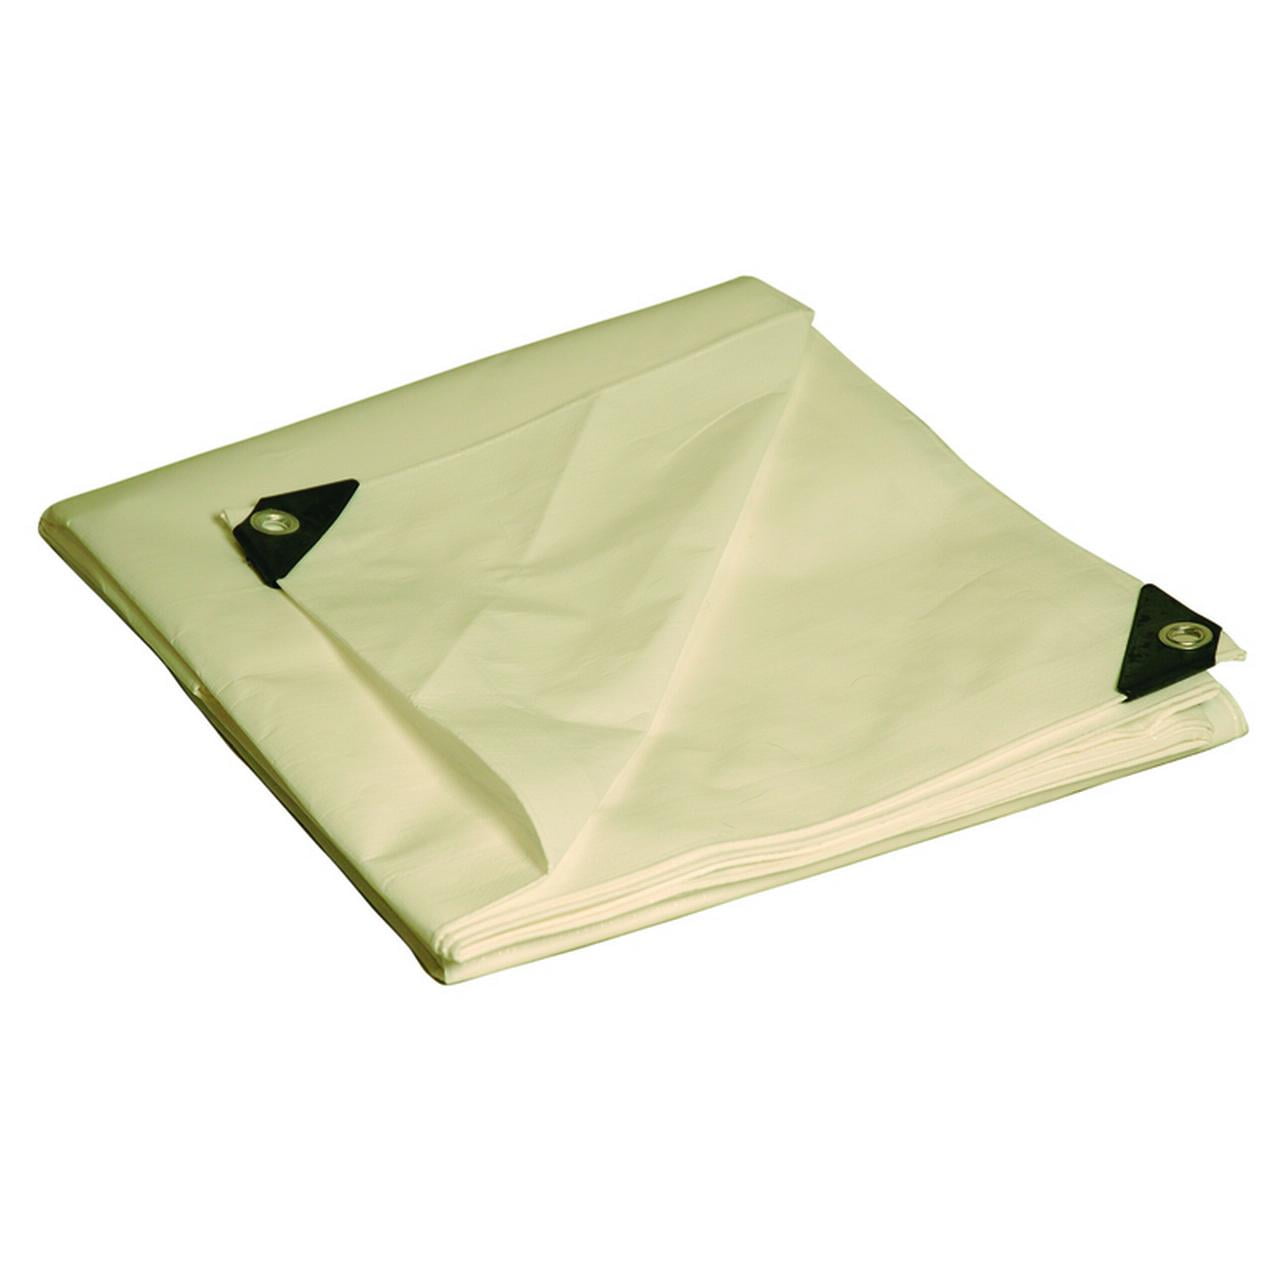 2 Pack Standard-Duty 3.5 Mil Poly Tarp 9' x 9' All Purpose Green Cover Grommets 